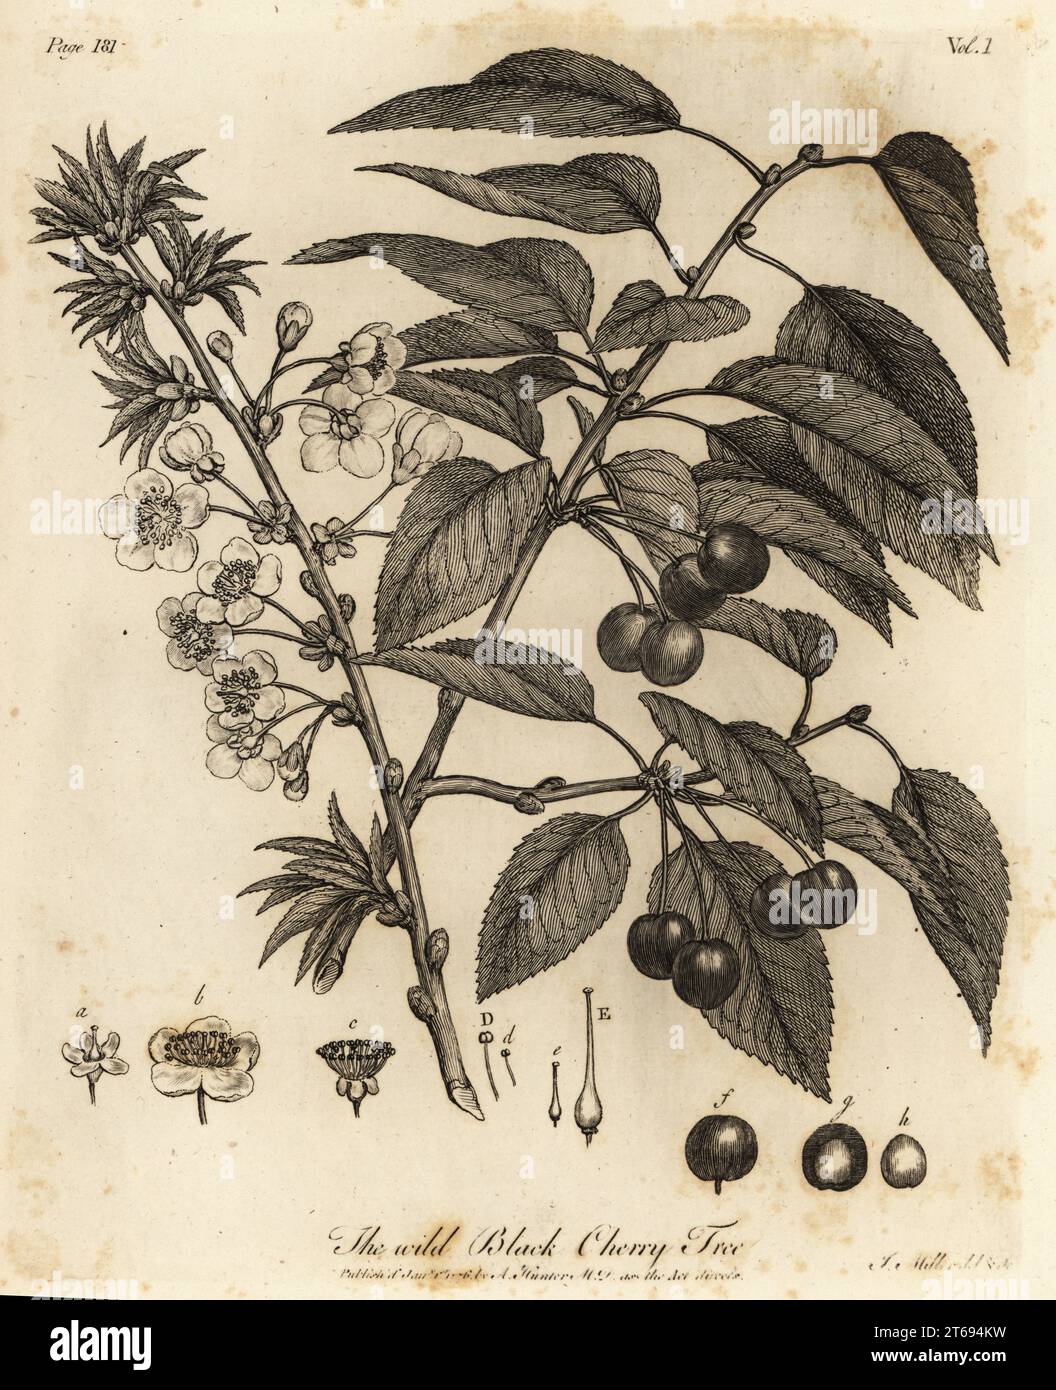 Sour cherry, tart cherry or dwarf cherry, Prunus cerasus. Wild Black Cherry Tree. Copperplate engraving drawn and engraved by John Miller (Johann Sebastian Muller) from John Evelyns Sylva, or A Discourse of Forest Trees and the Propagation of Timer, J. Dodsley, London, 1776. Stock Photo